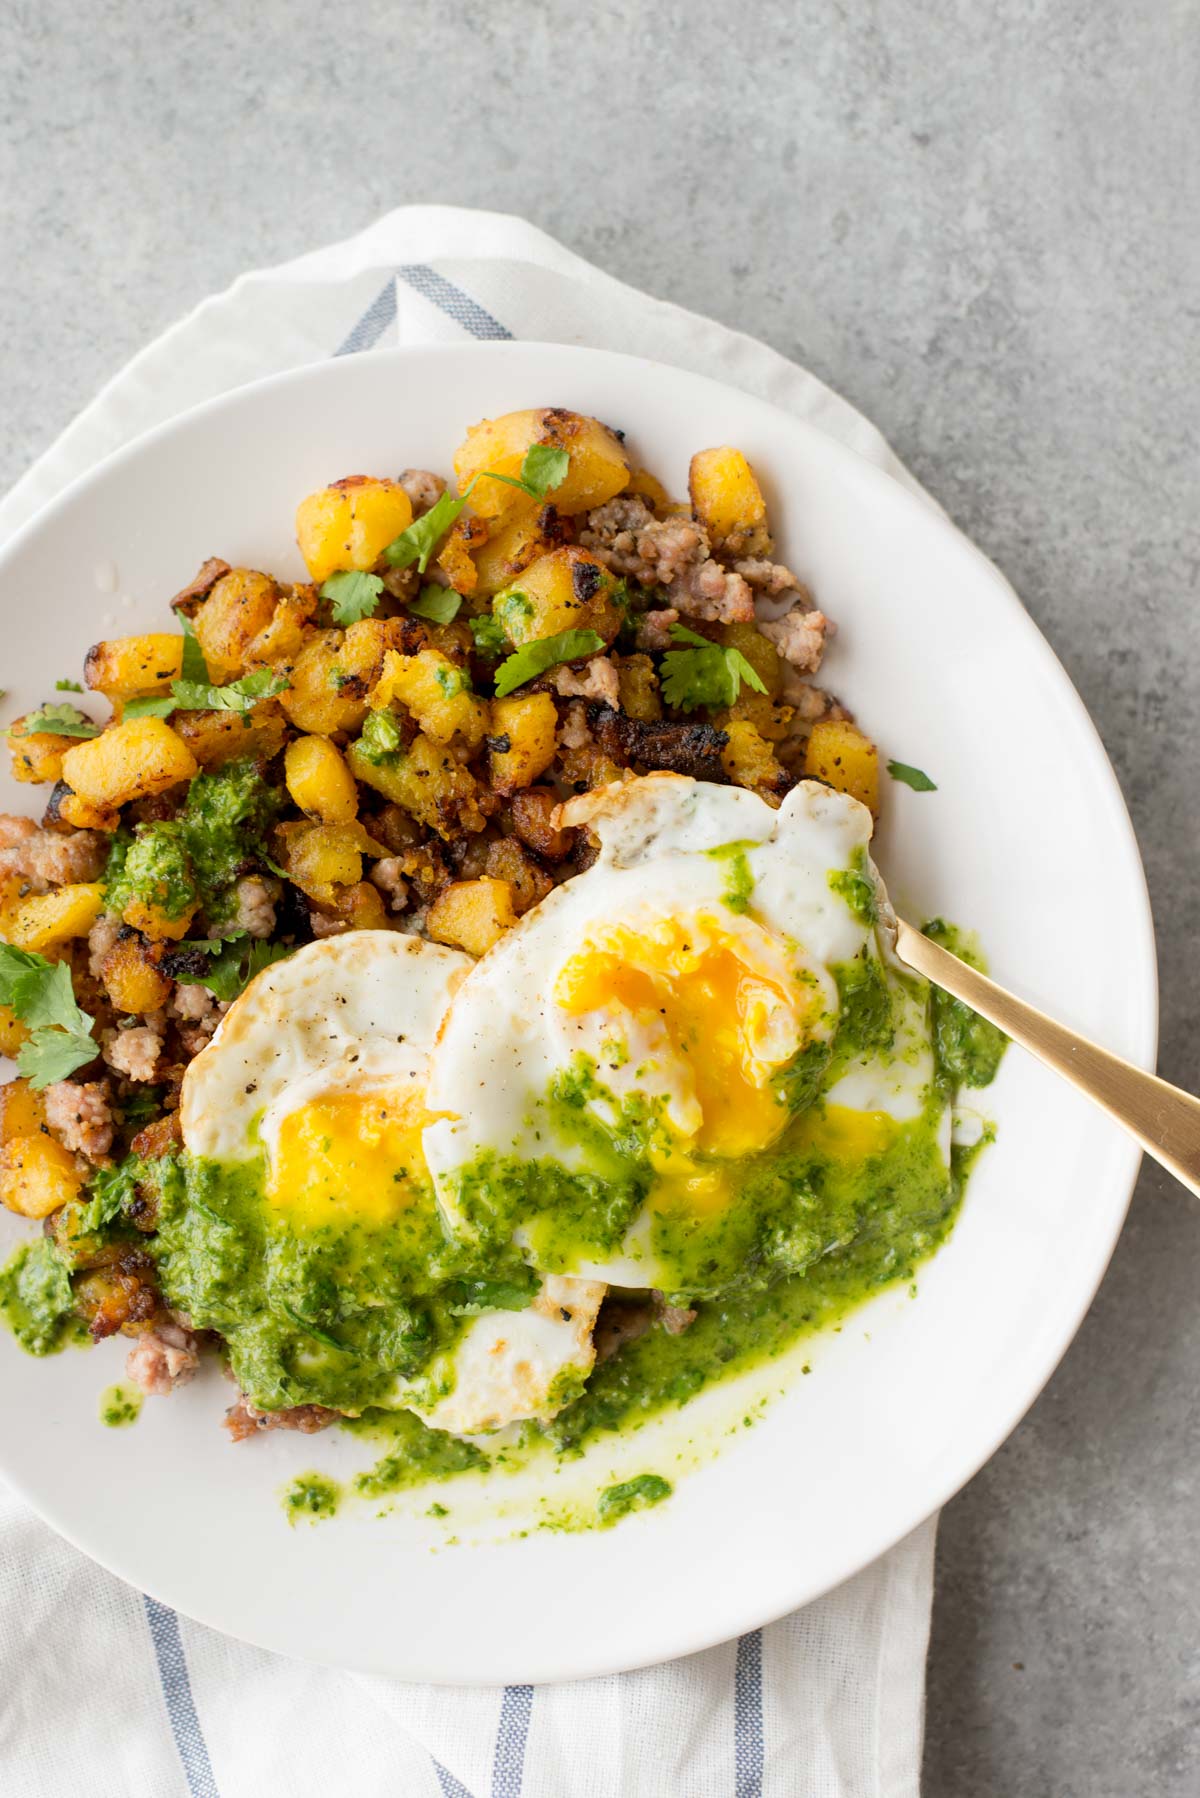 This quick and easy breakfast hash is paleo compliant and made in 10 minutes. 